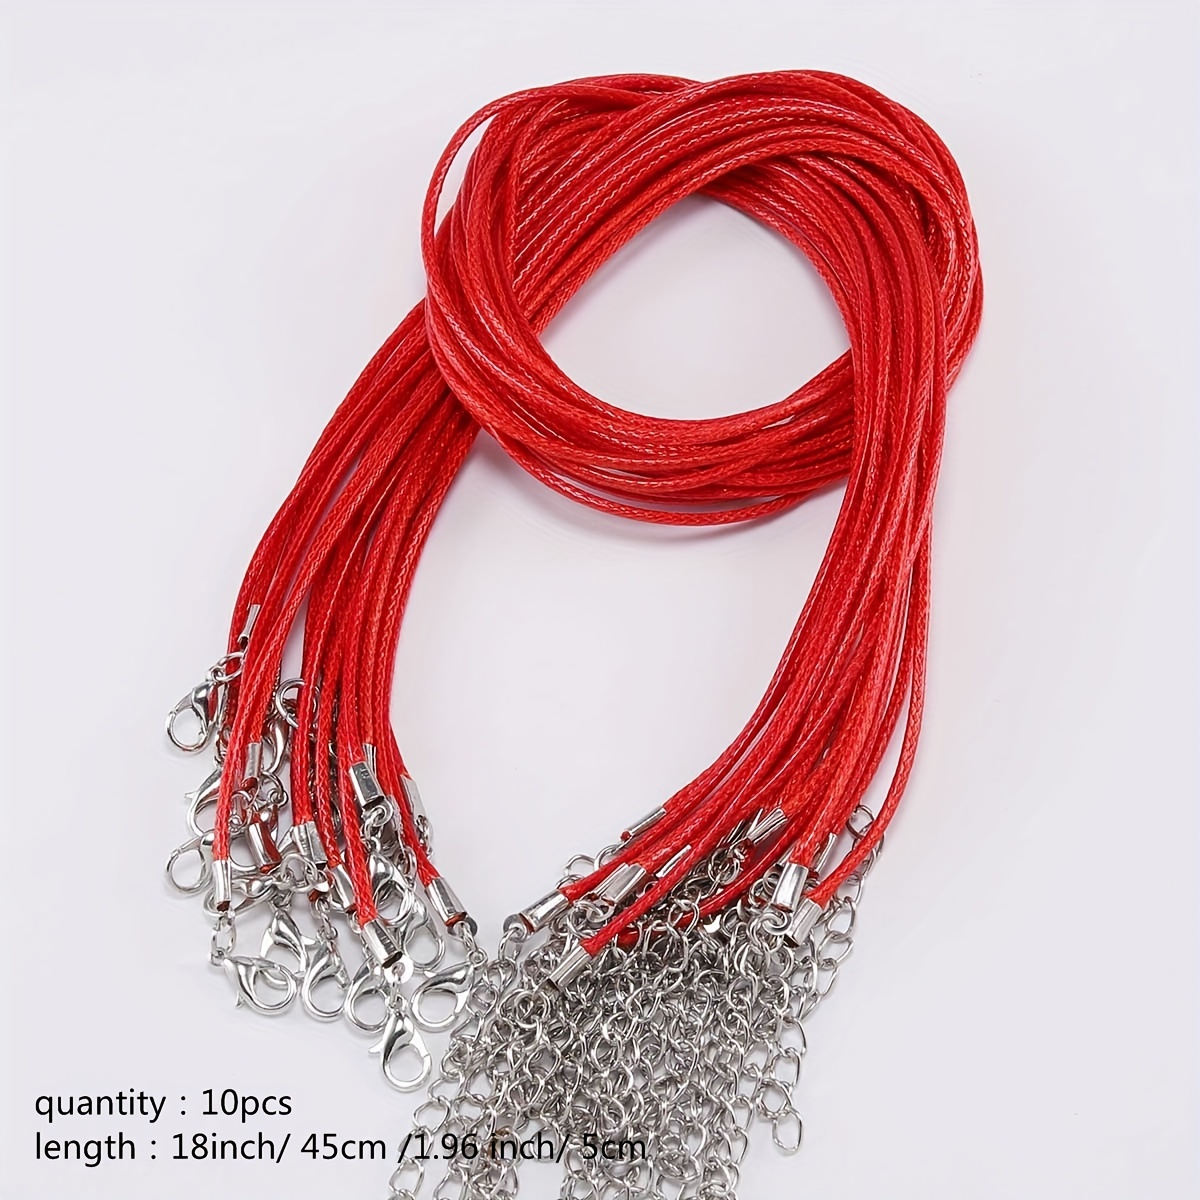 10pcs Waxed Necklace Cord Bulk, 16 and 1.5mm Dia Necklace String Rope,  Wine Red